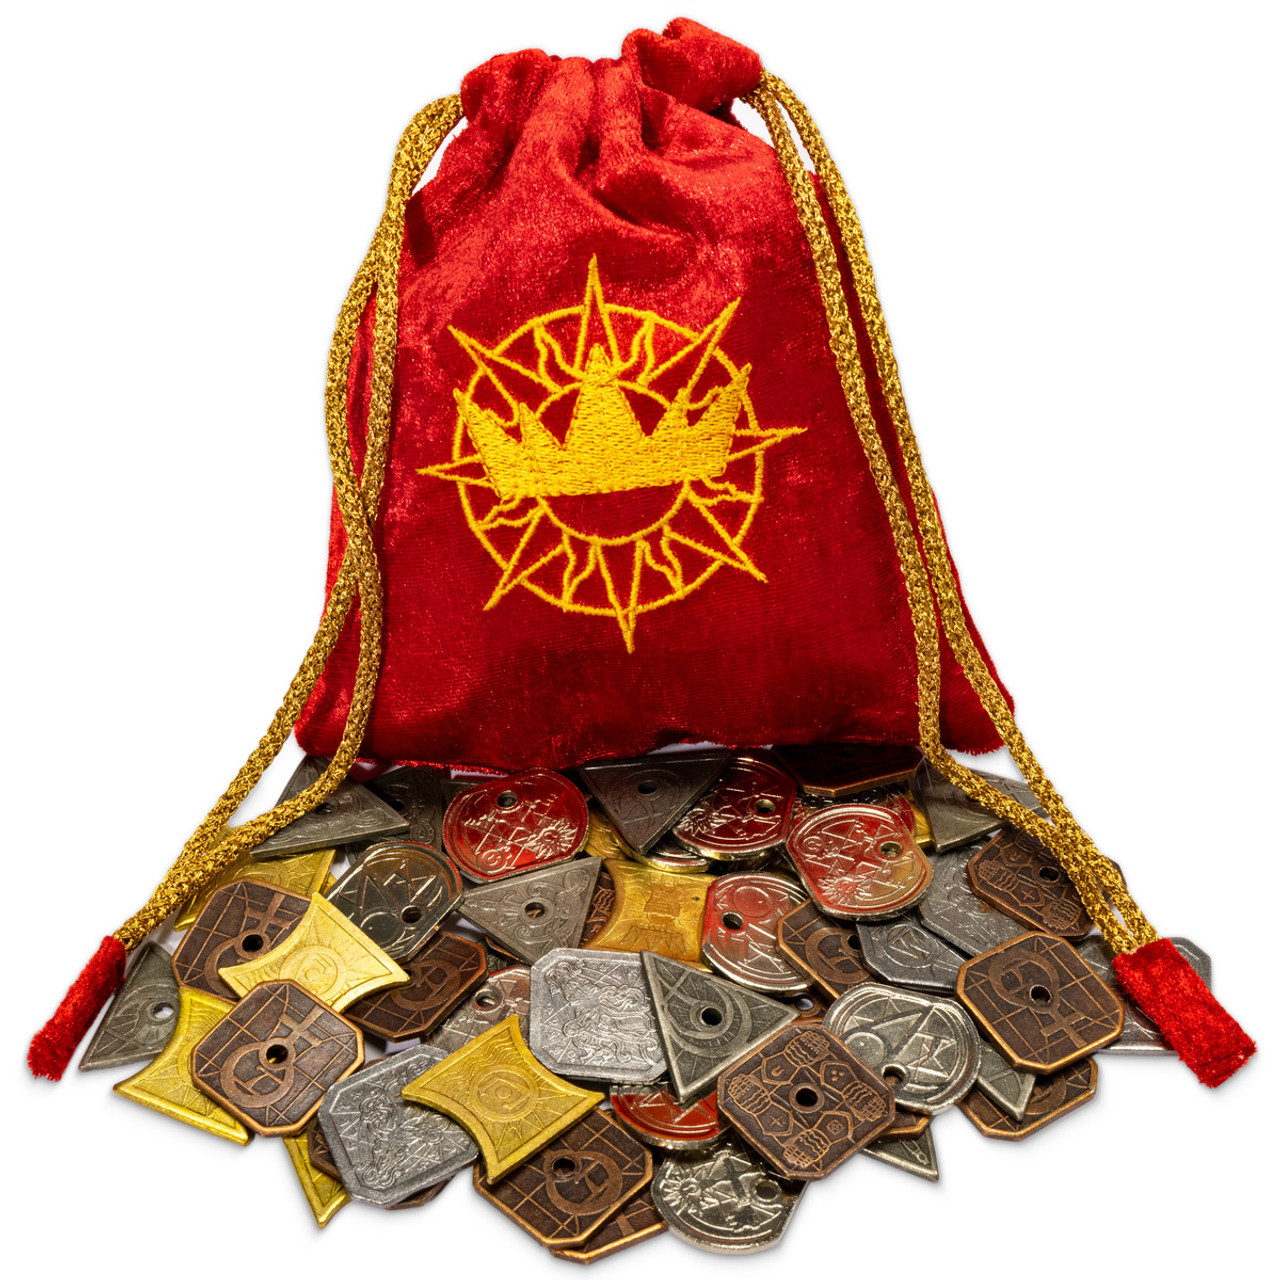 D&D Fantasy Coins - 50 Antique Gold Metal Treasure Tokens with